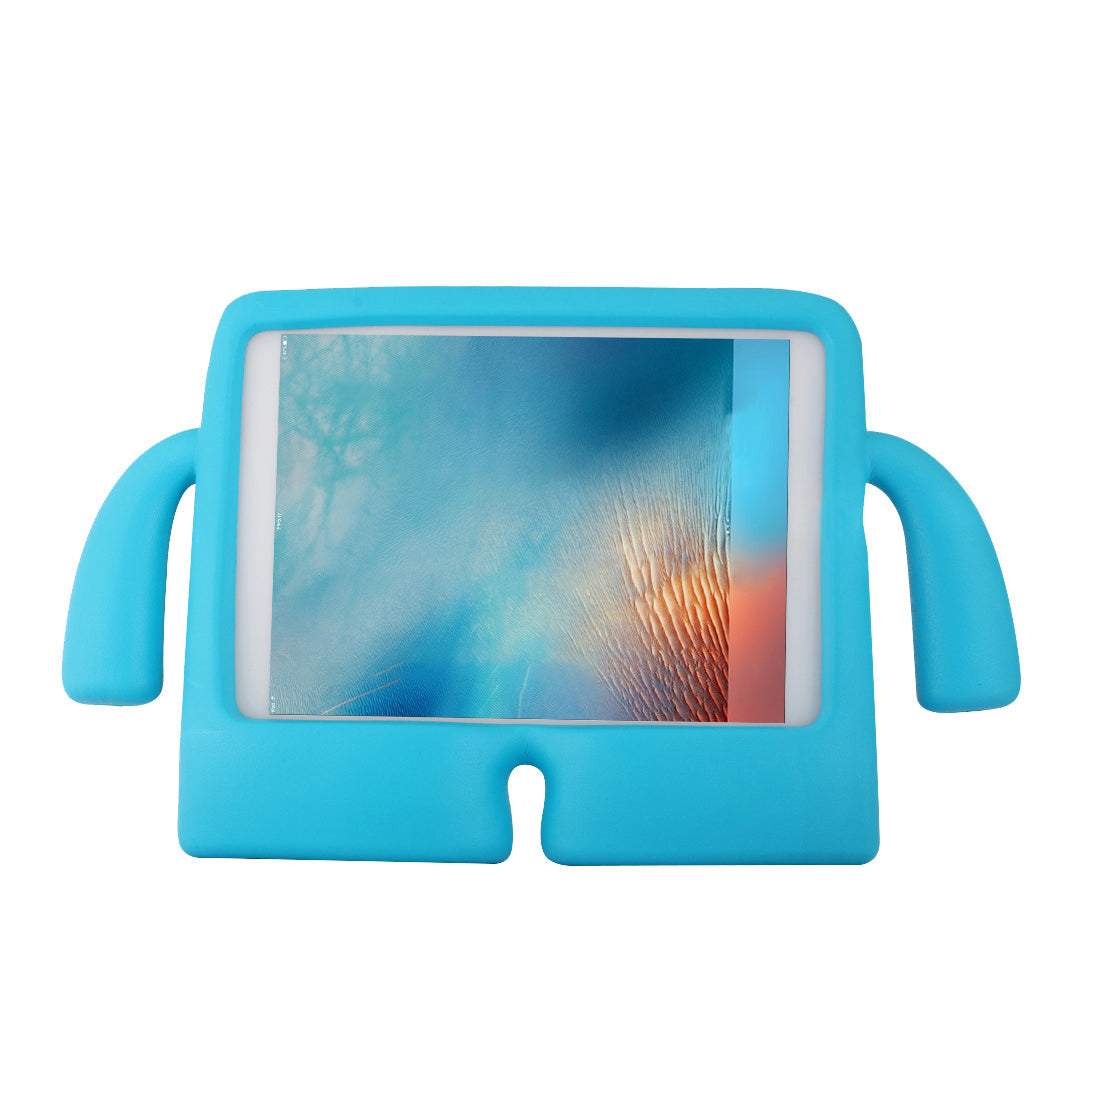 For Apple iPad Air 3 10.5" 2019 Kids Case Shockproof Cover With Carry Handle - Blue